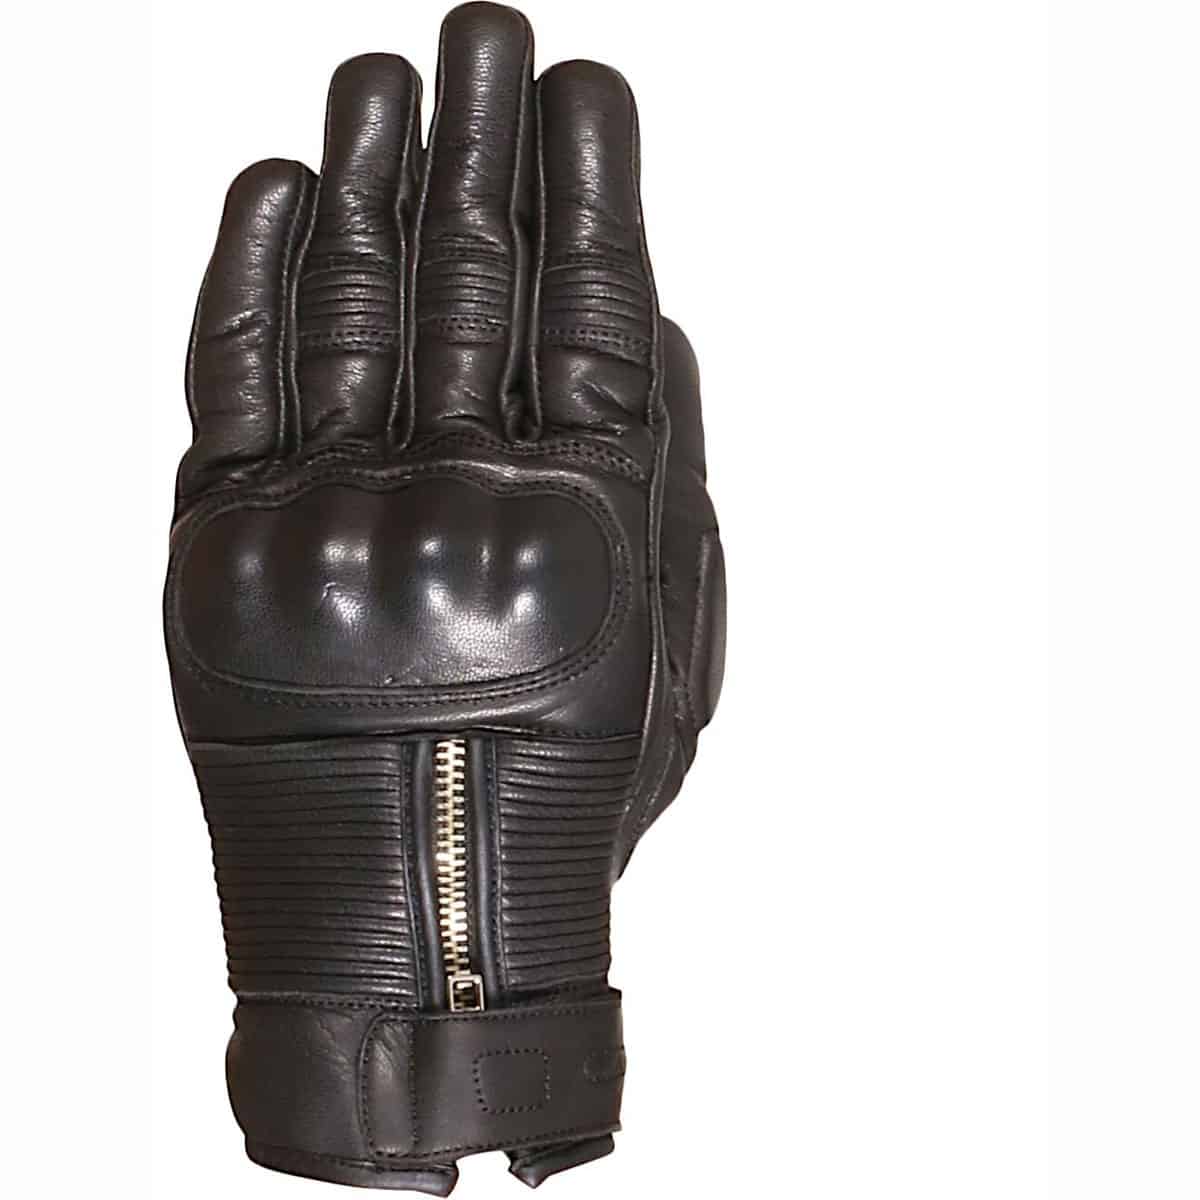 Weise Union summer leather motorcycle gloves black 1